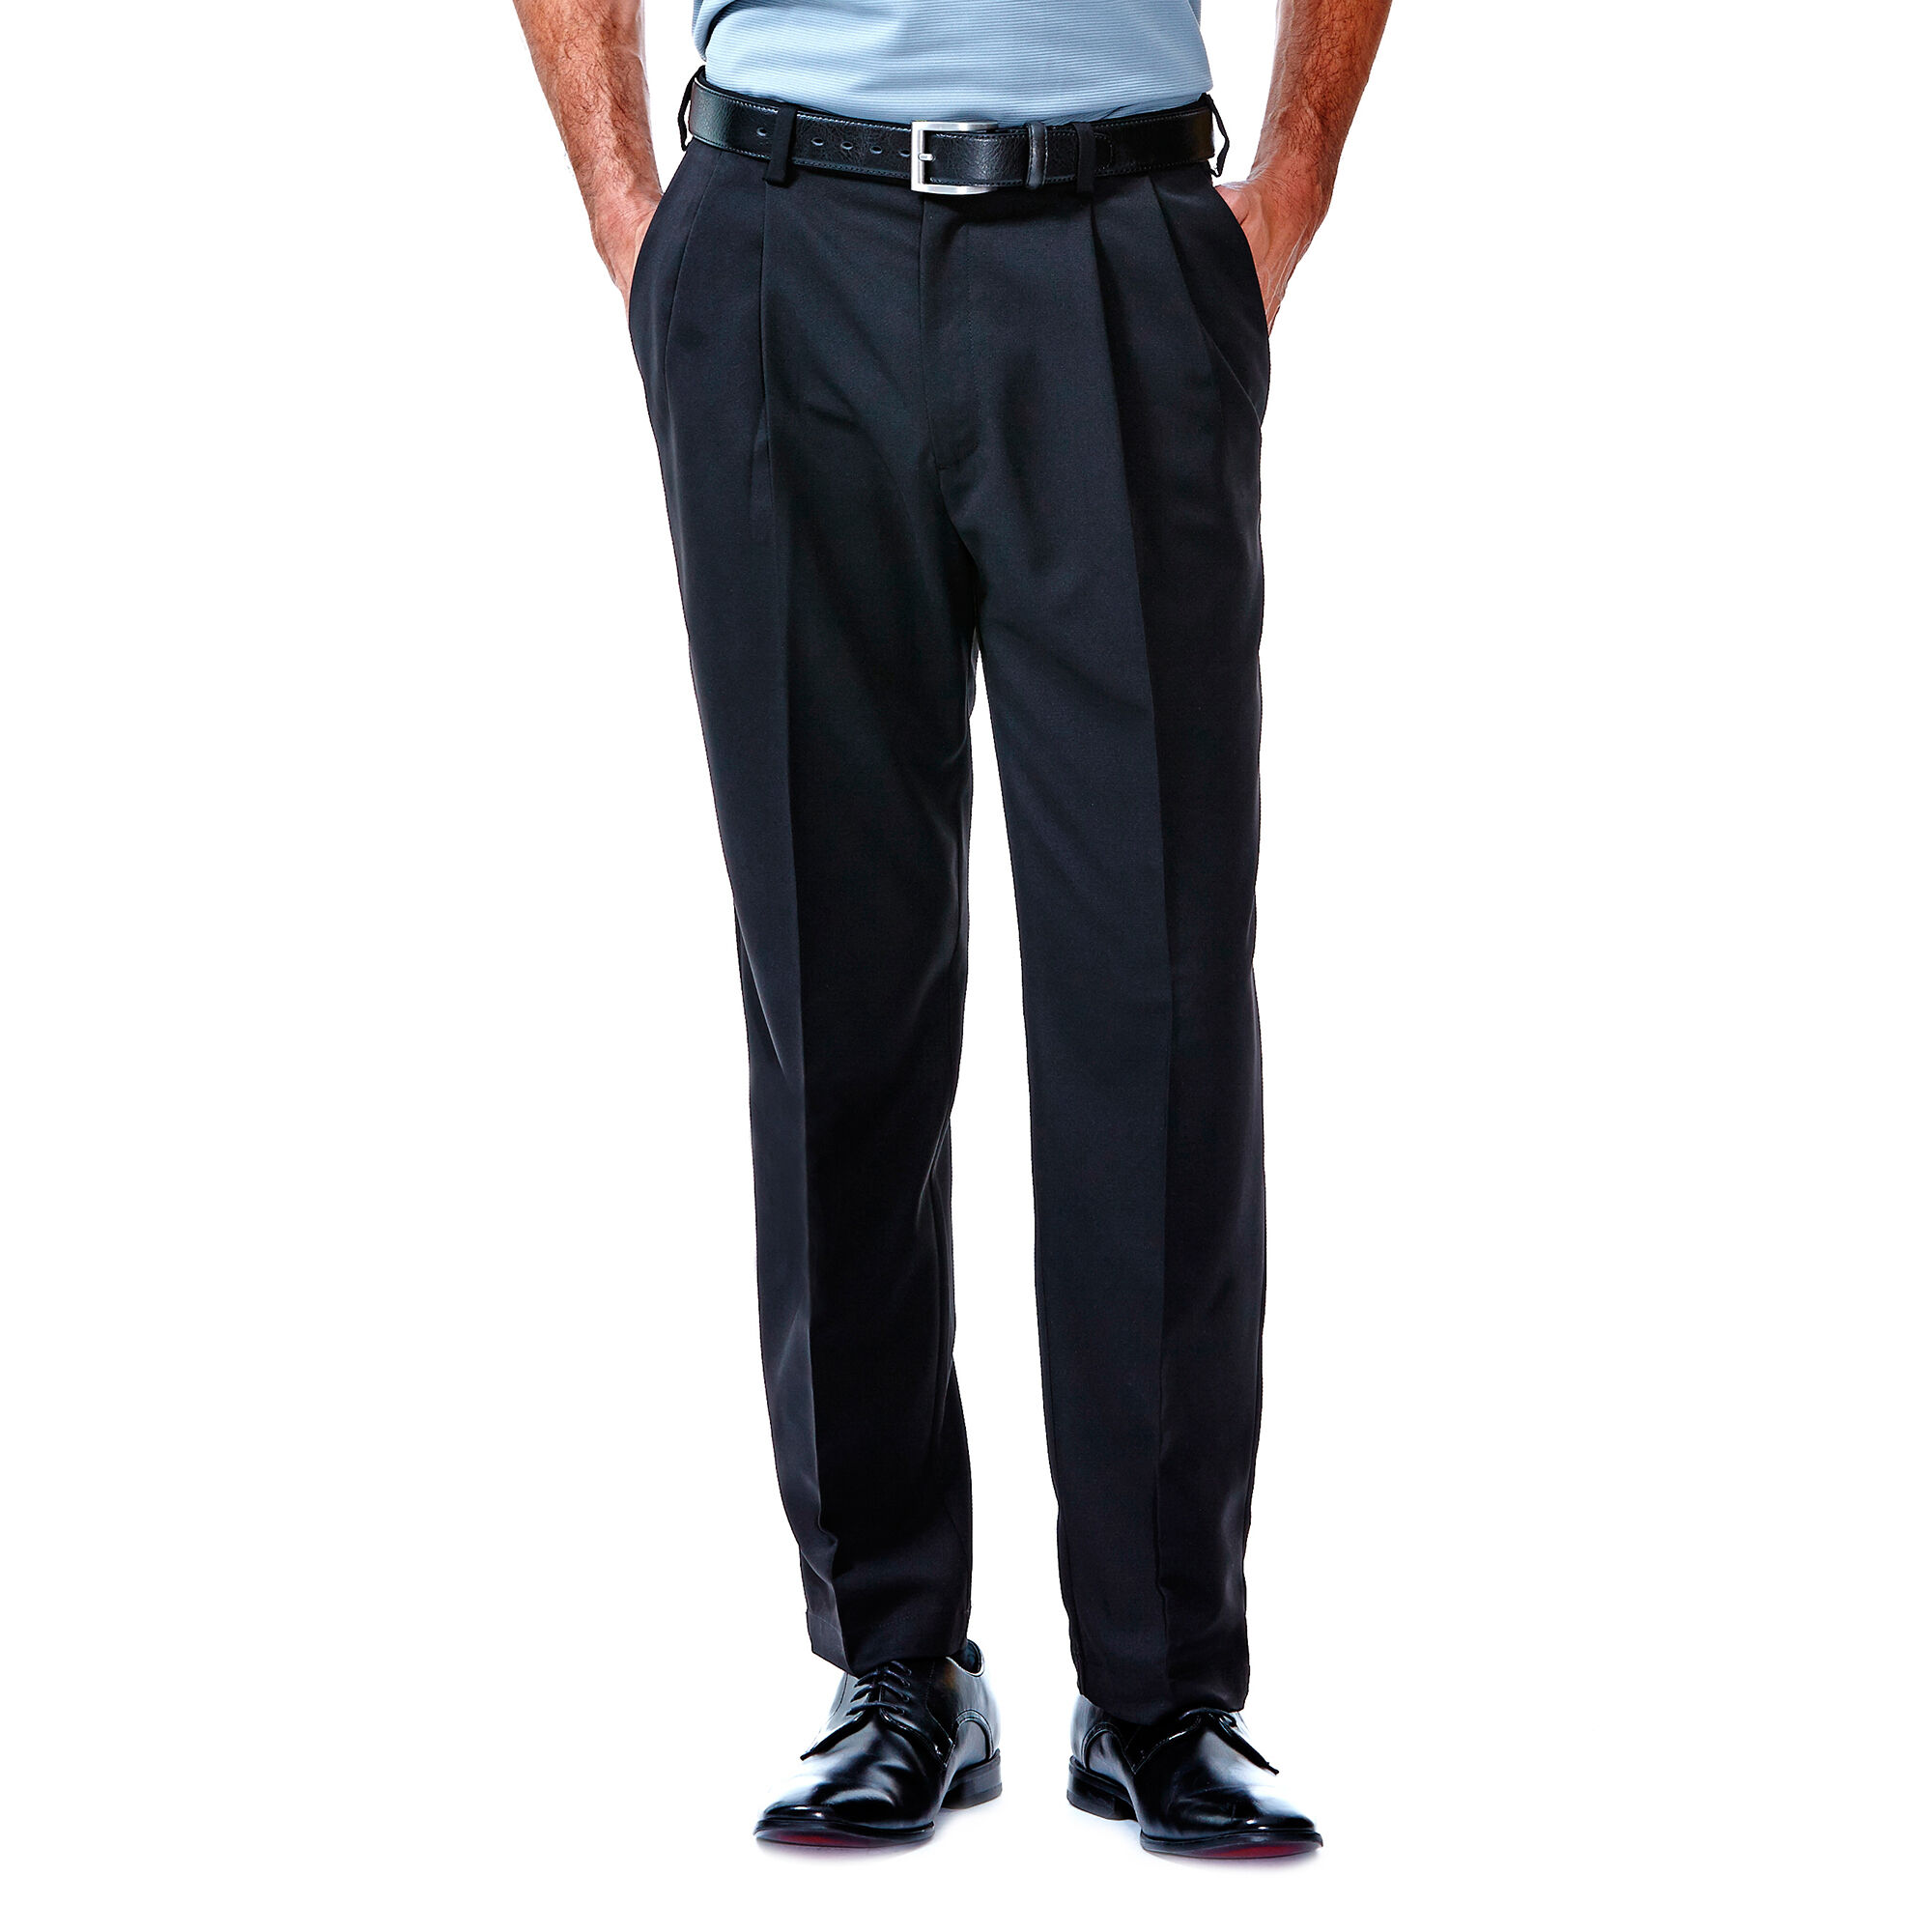 Haggar Mens Cool 18 Hidden Expandable Waist Pleat Front Pant-Regular and Big & Tall Sizes 